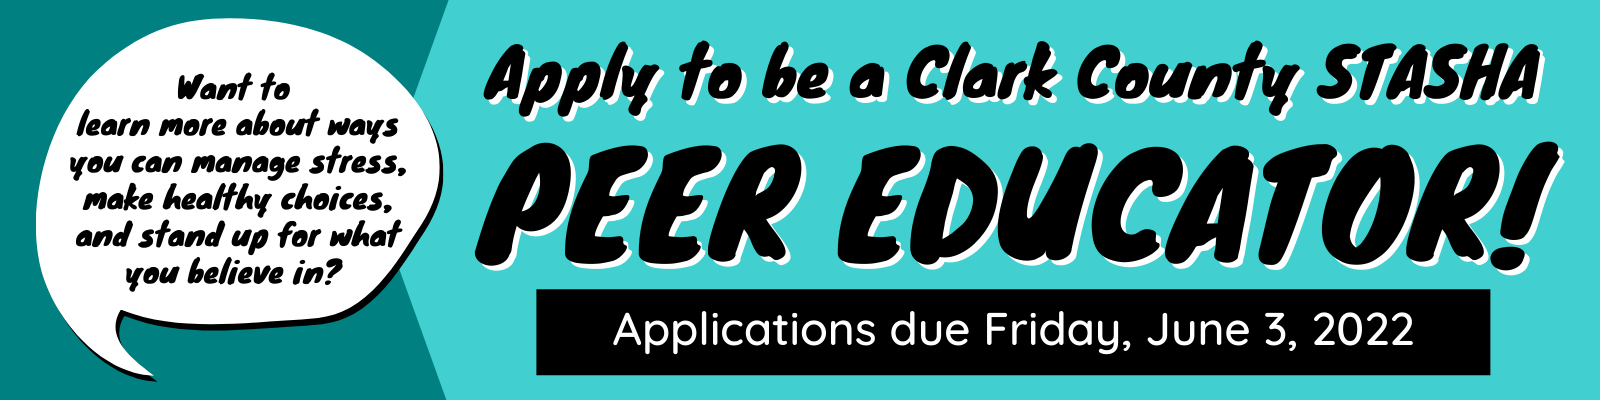 Want to learn more about ways you can manage stress, make healthy choices, and stand up for what you believe in? Apply to be a Clark County STASHA peer educator! Applications due Friday, June 3, 2022